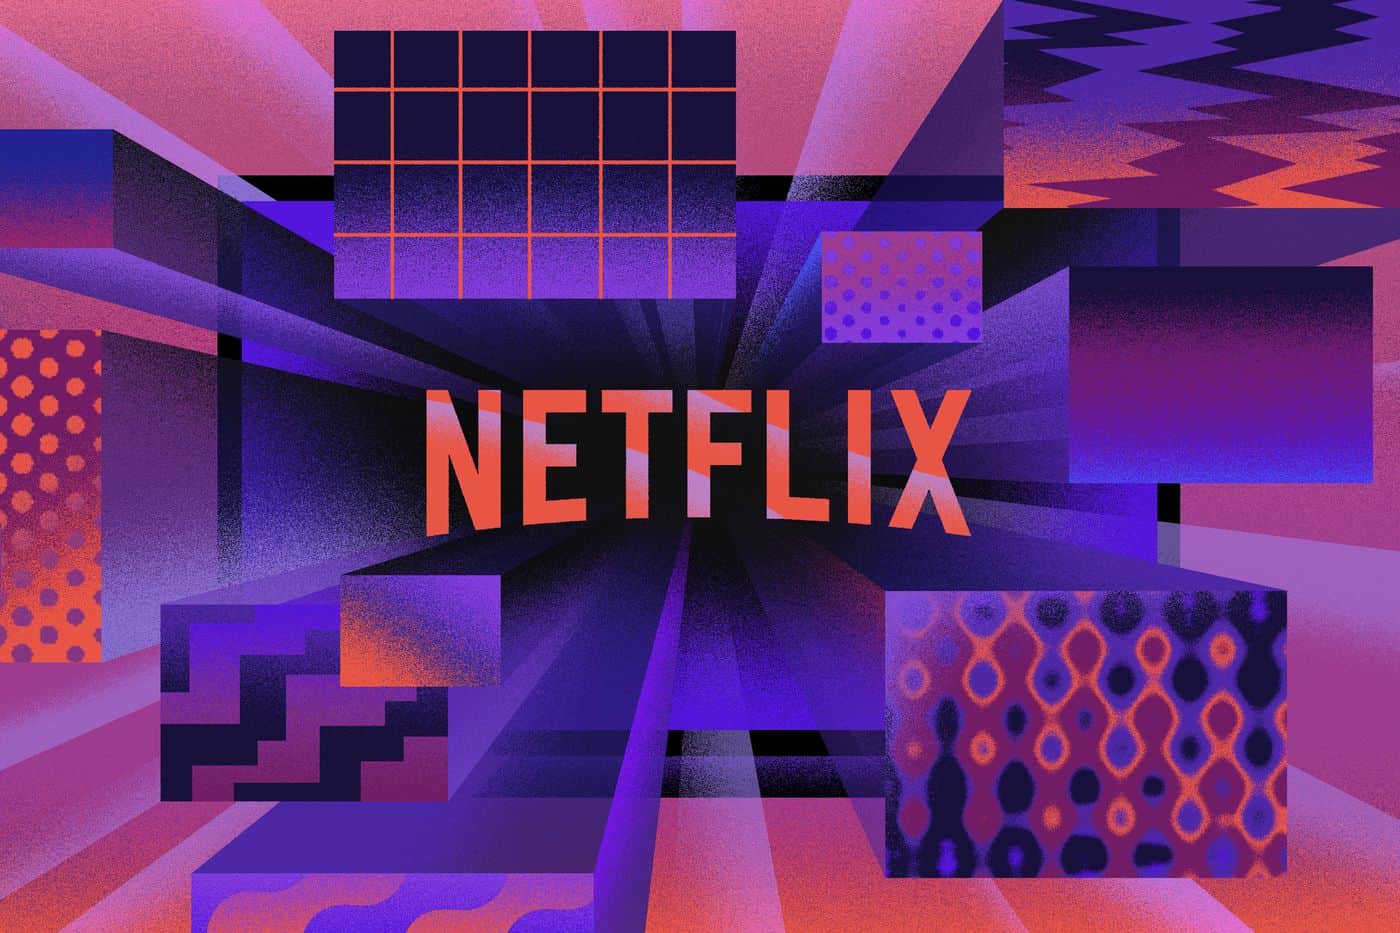 Netflix is making a documentary on Bitfinex hack involving 120,000 bitcoin